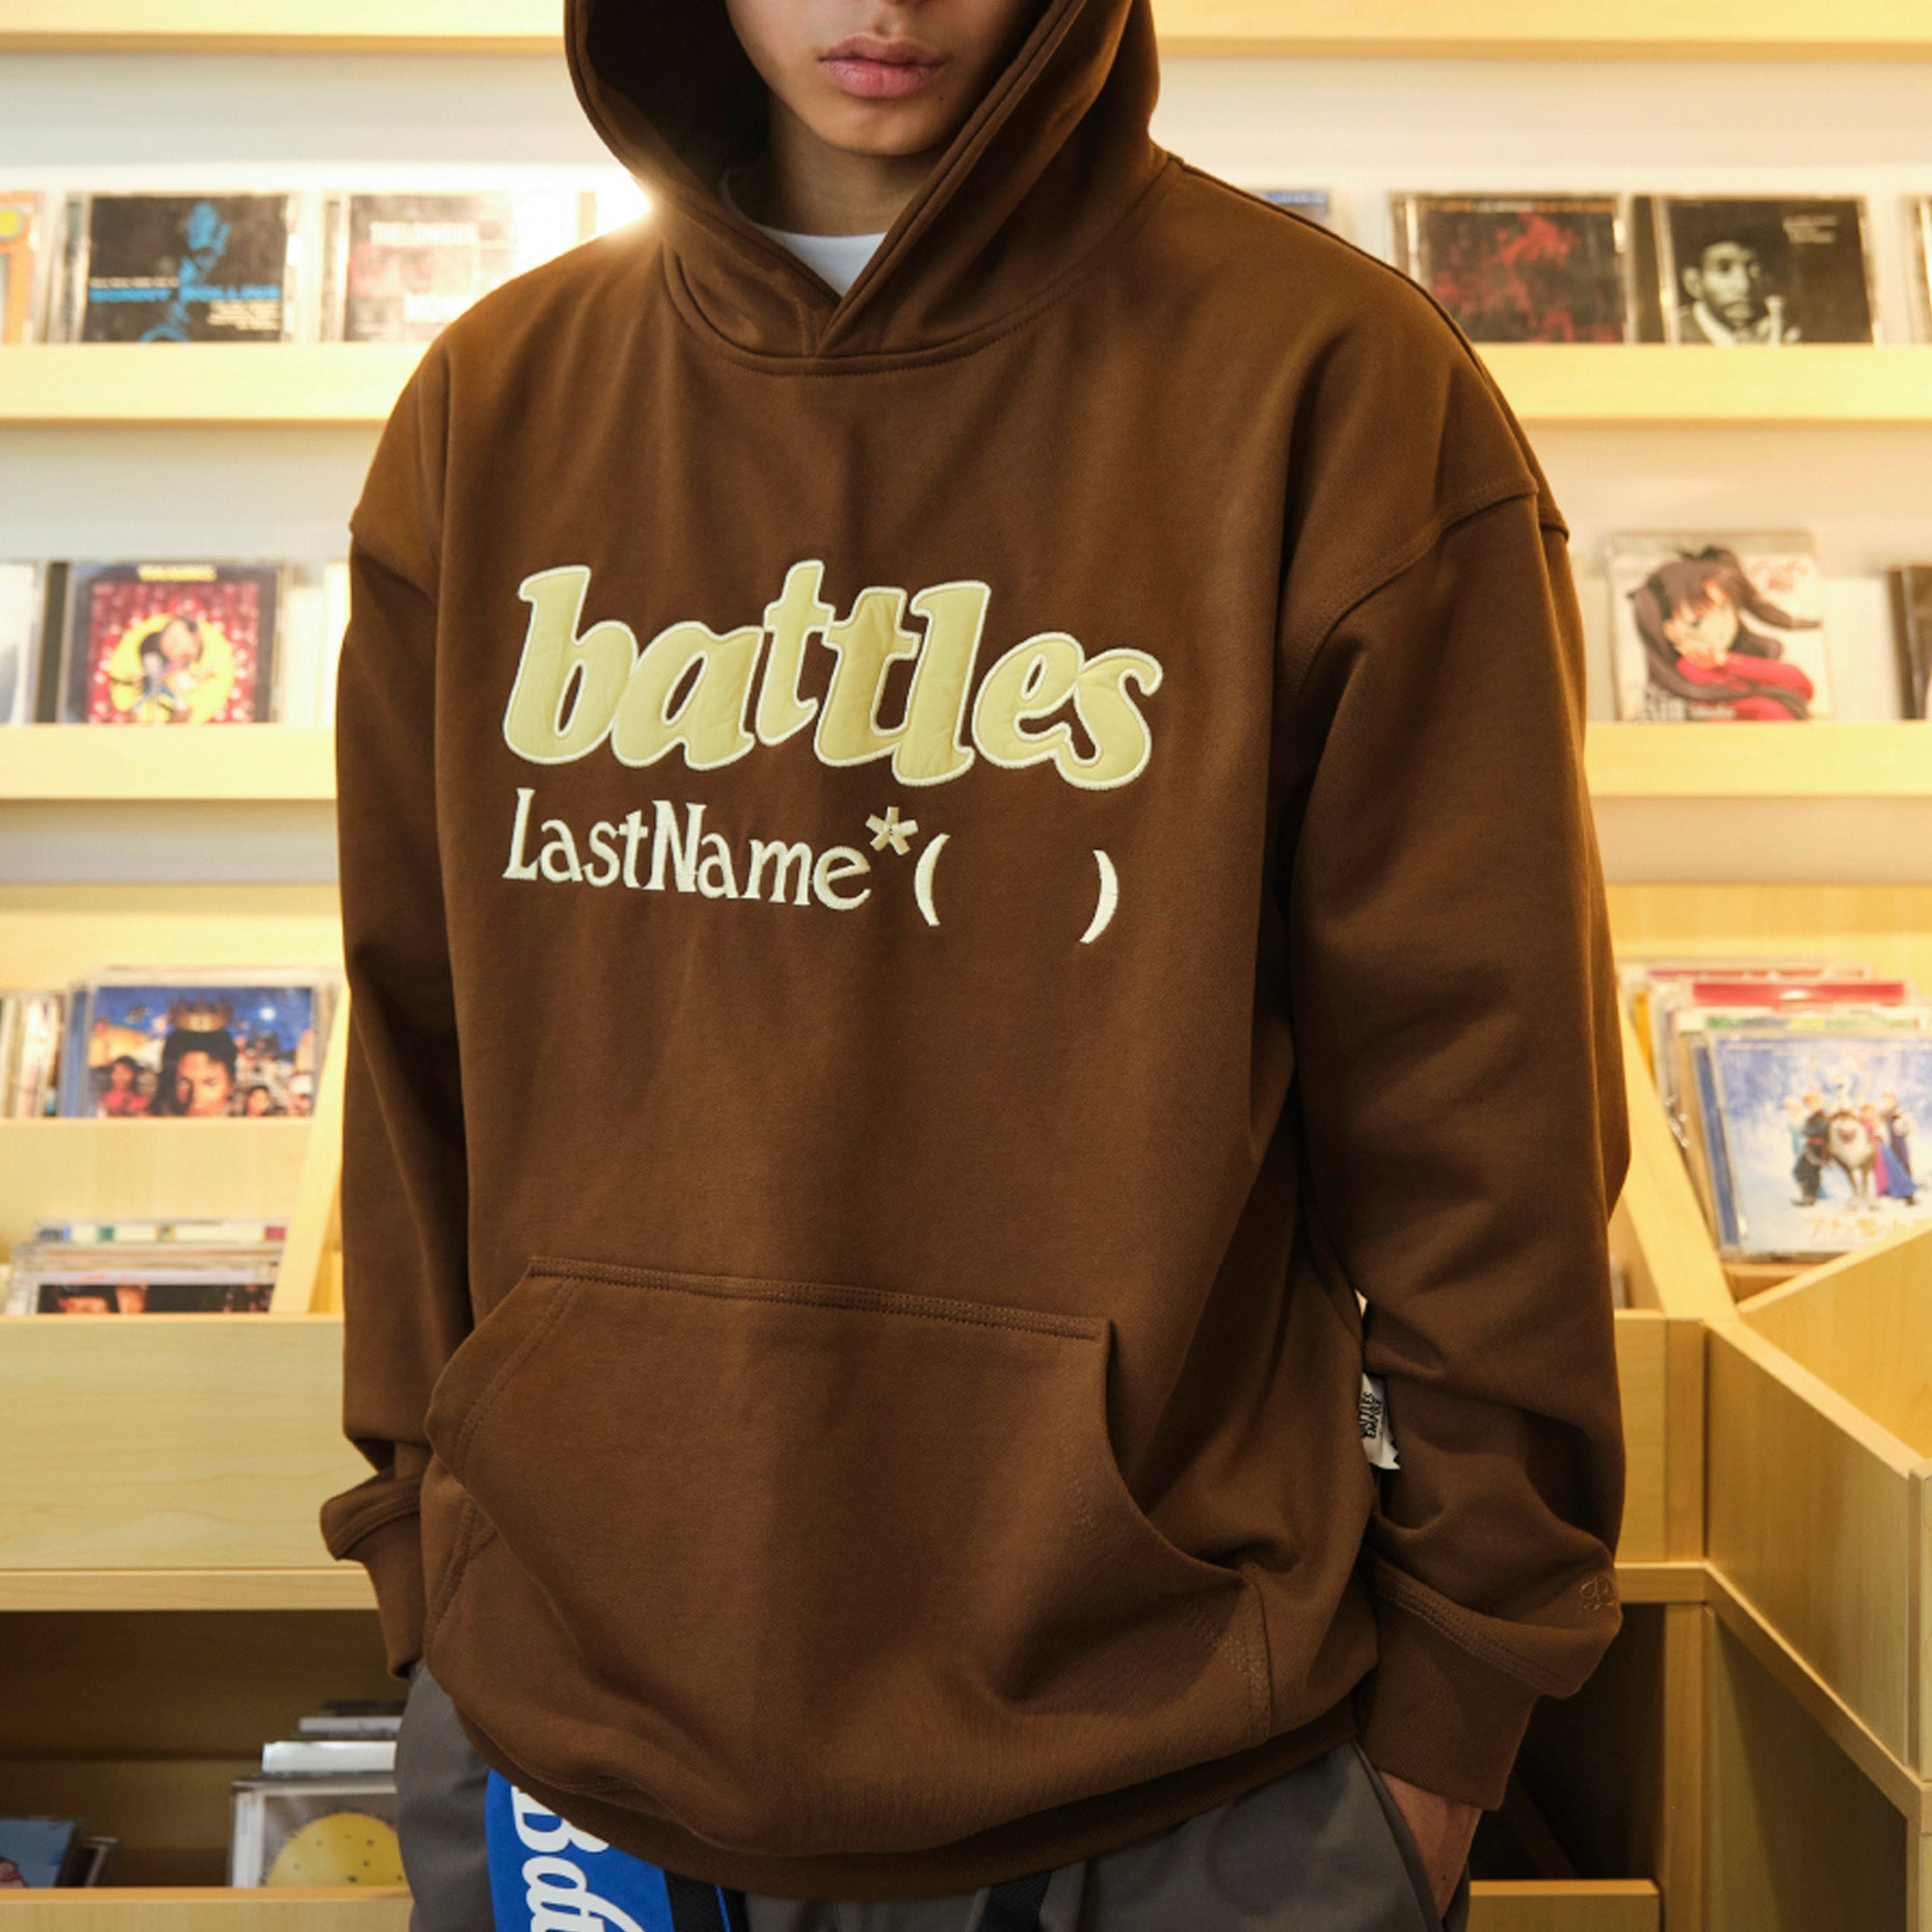 Embroidered logo hoodie